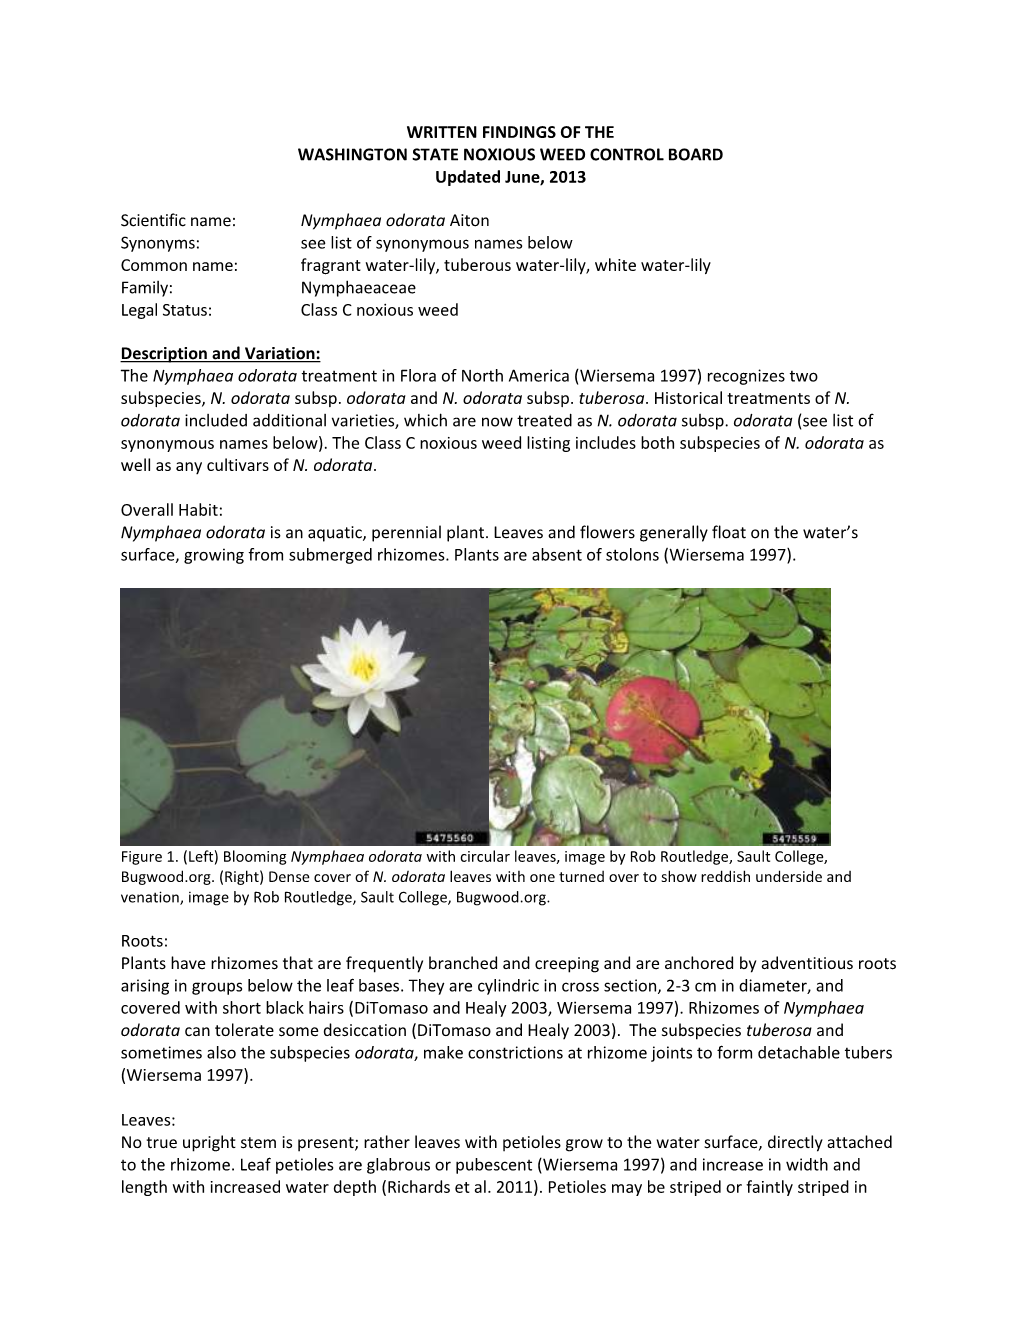 WRITTEN FINDINGS of the WASHINGTON STATE NOXIOUS WEED CONTROL BOARD Updated June, 2013 Scientific Name: Nymphaea Odorata Aiton